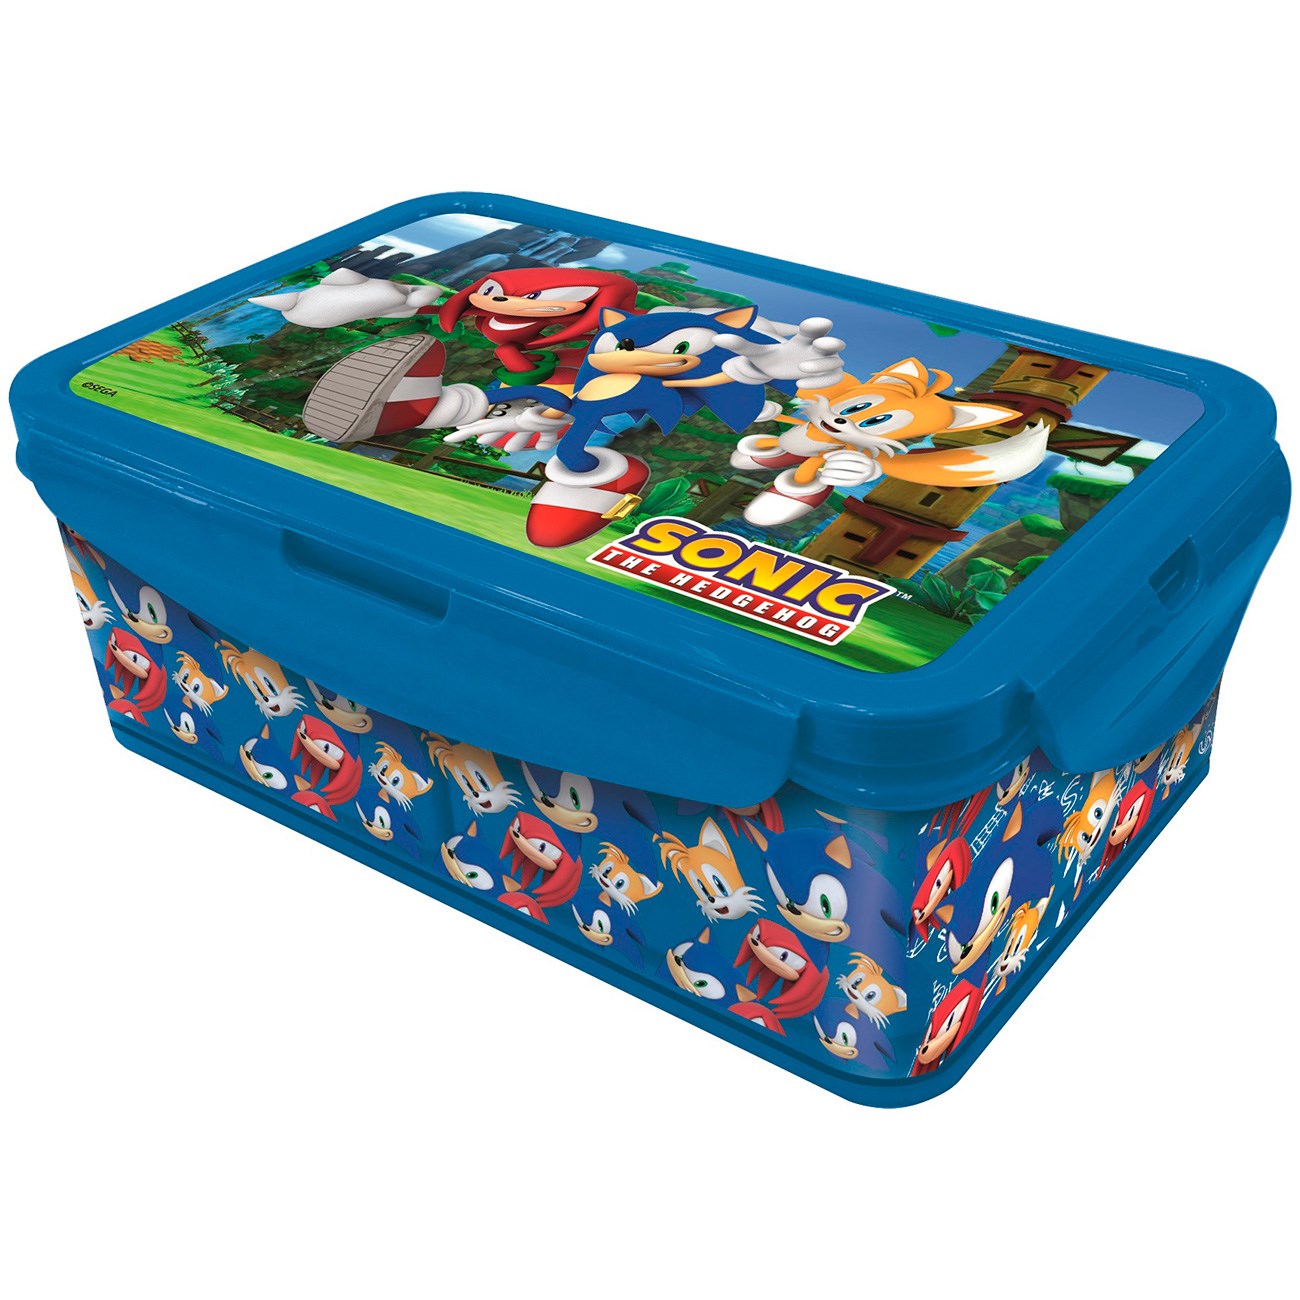 Euromic Large Sonic Lunchbox with Removable Compartments